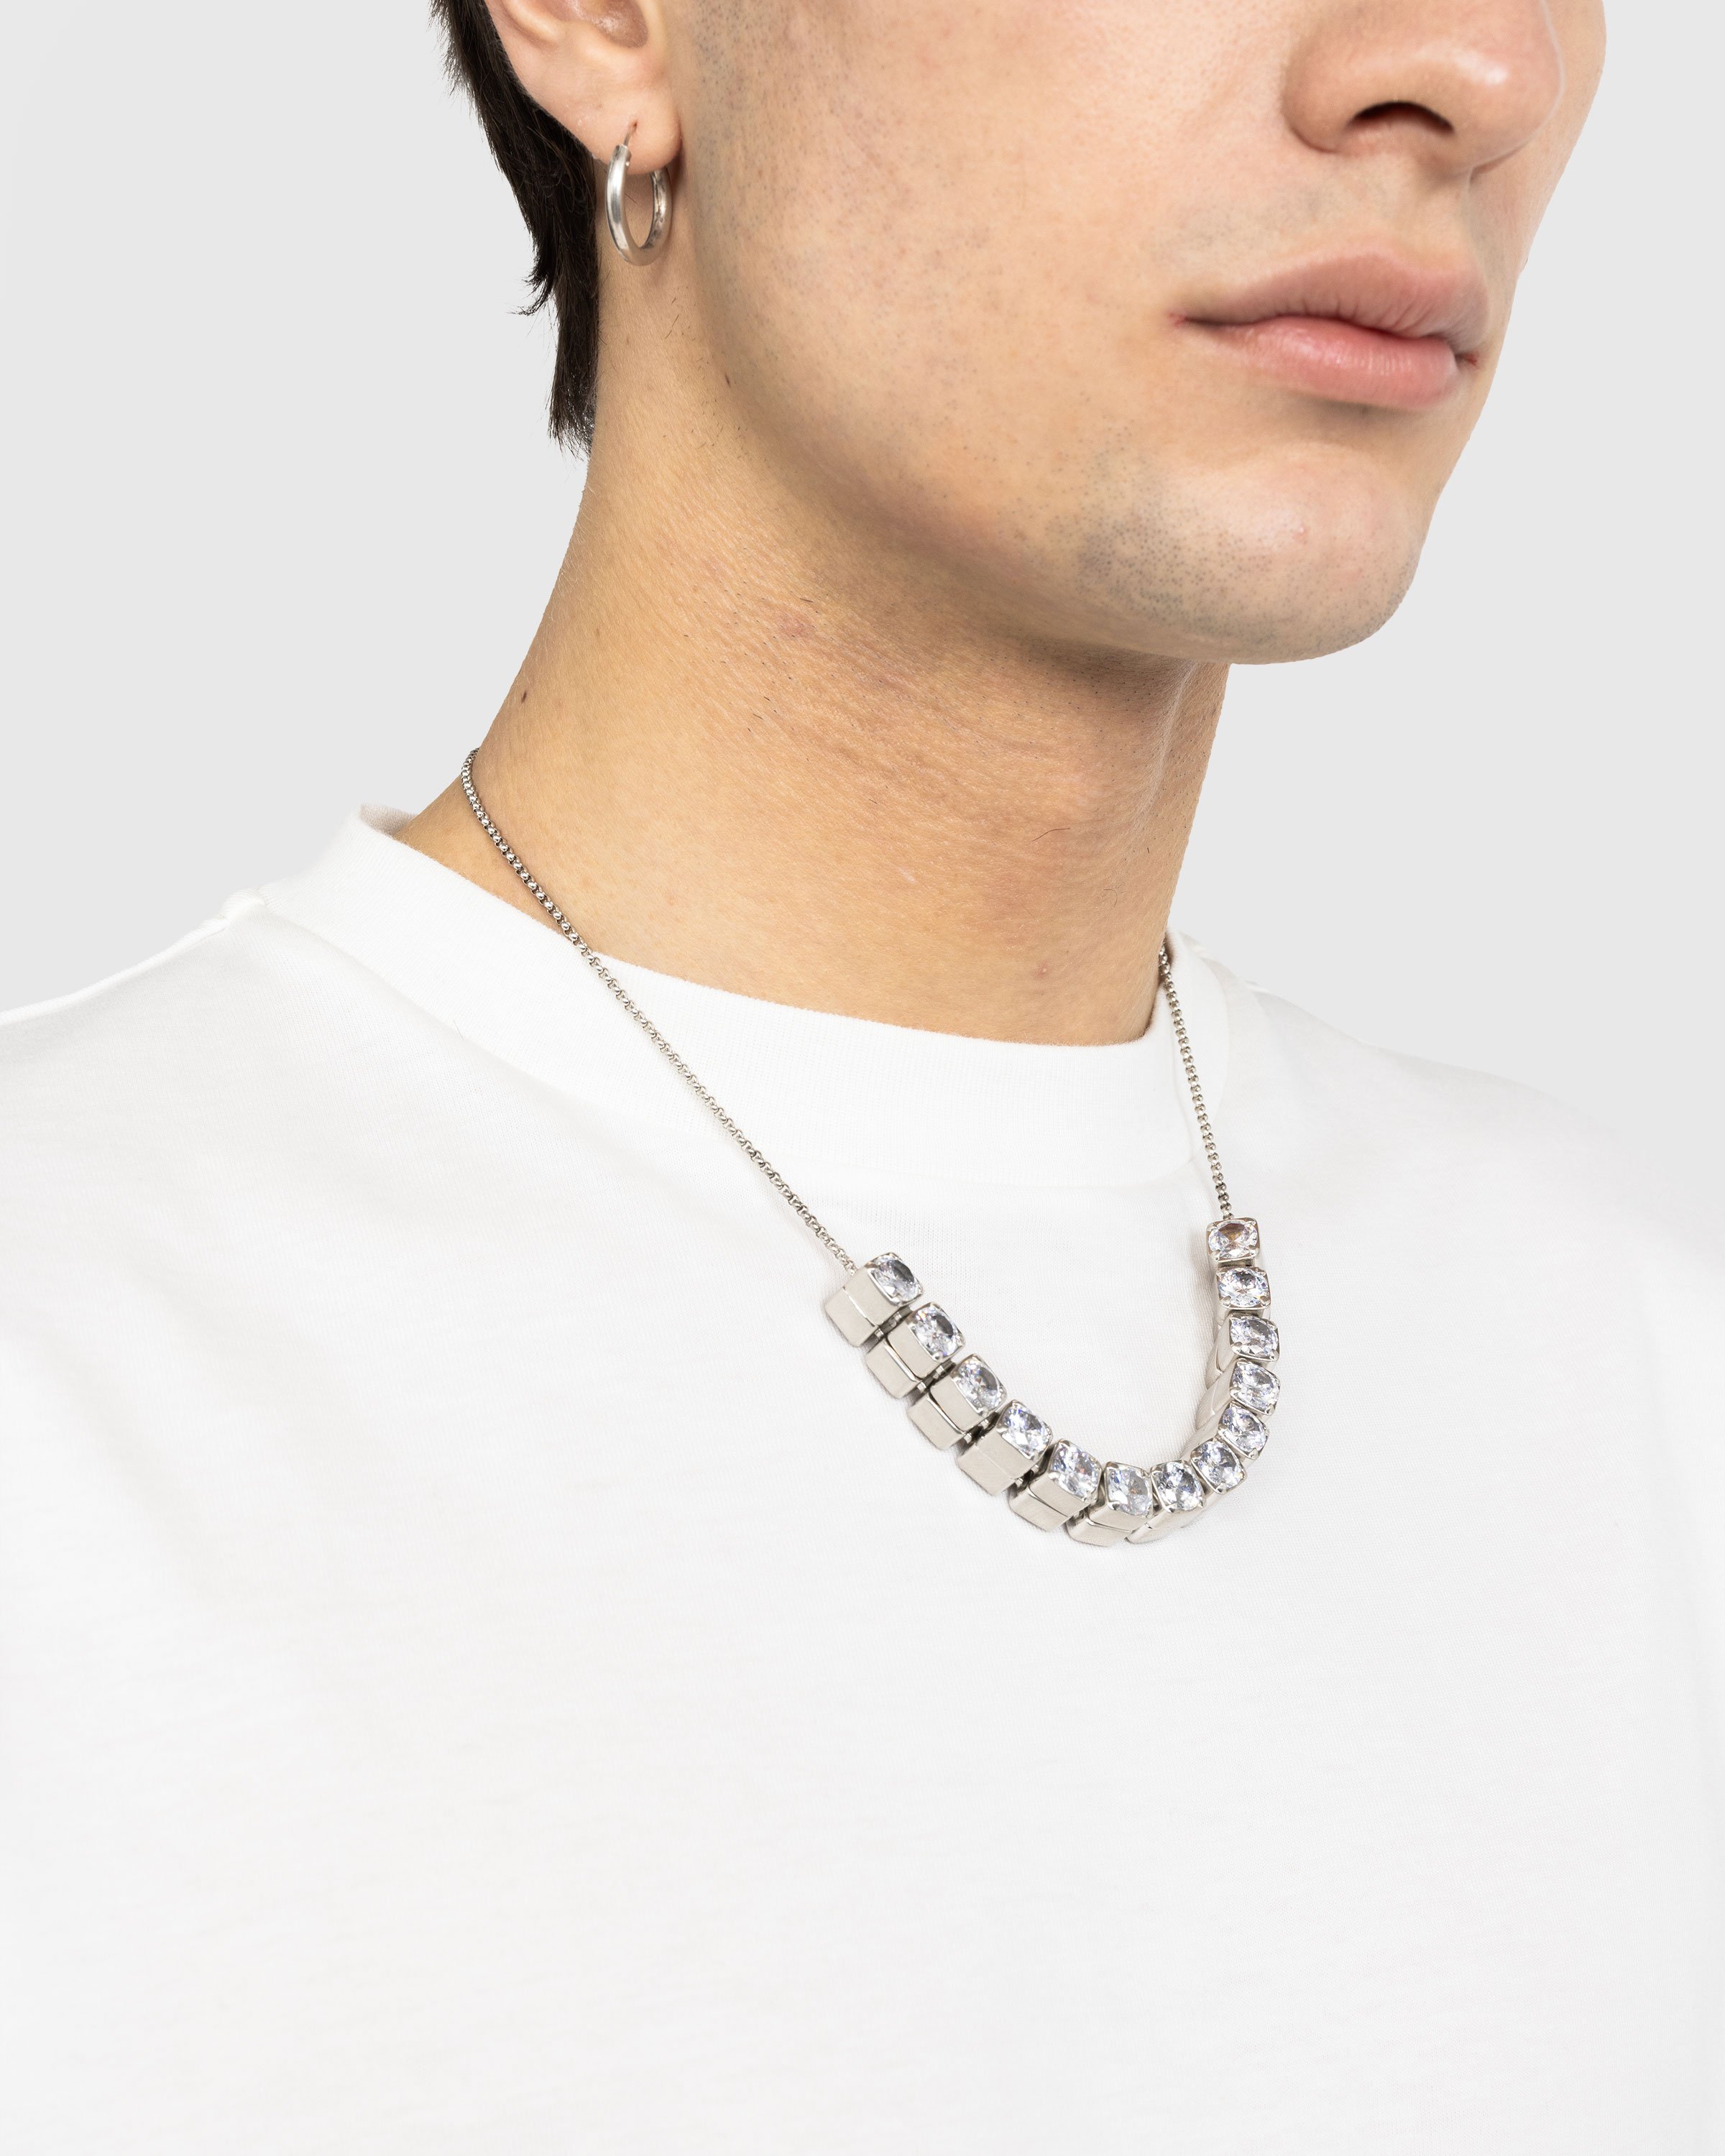 Jil Sander - Silver-toned Cubic Necklace - Accessories - Silver - Image 2